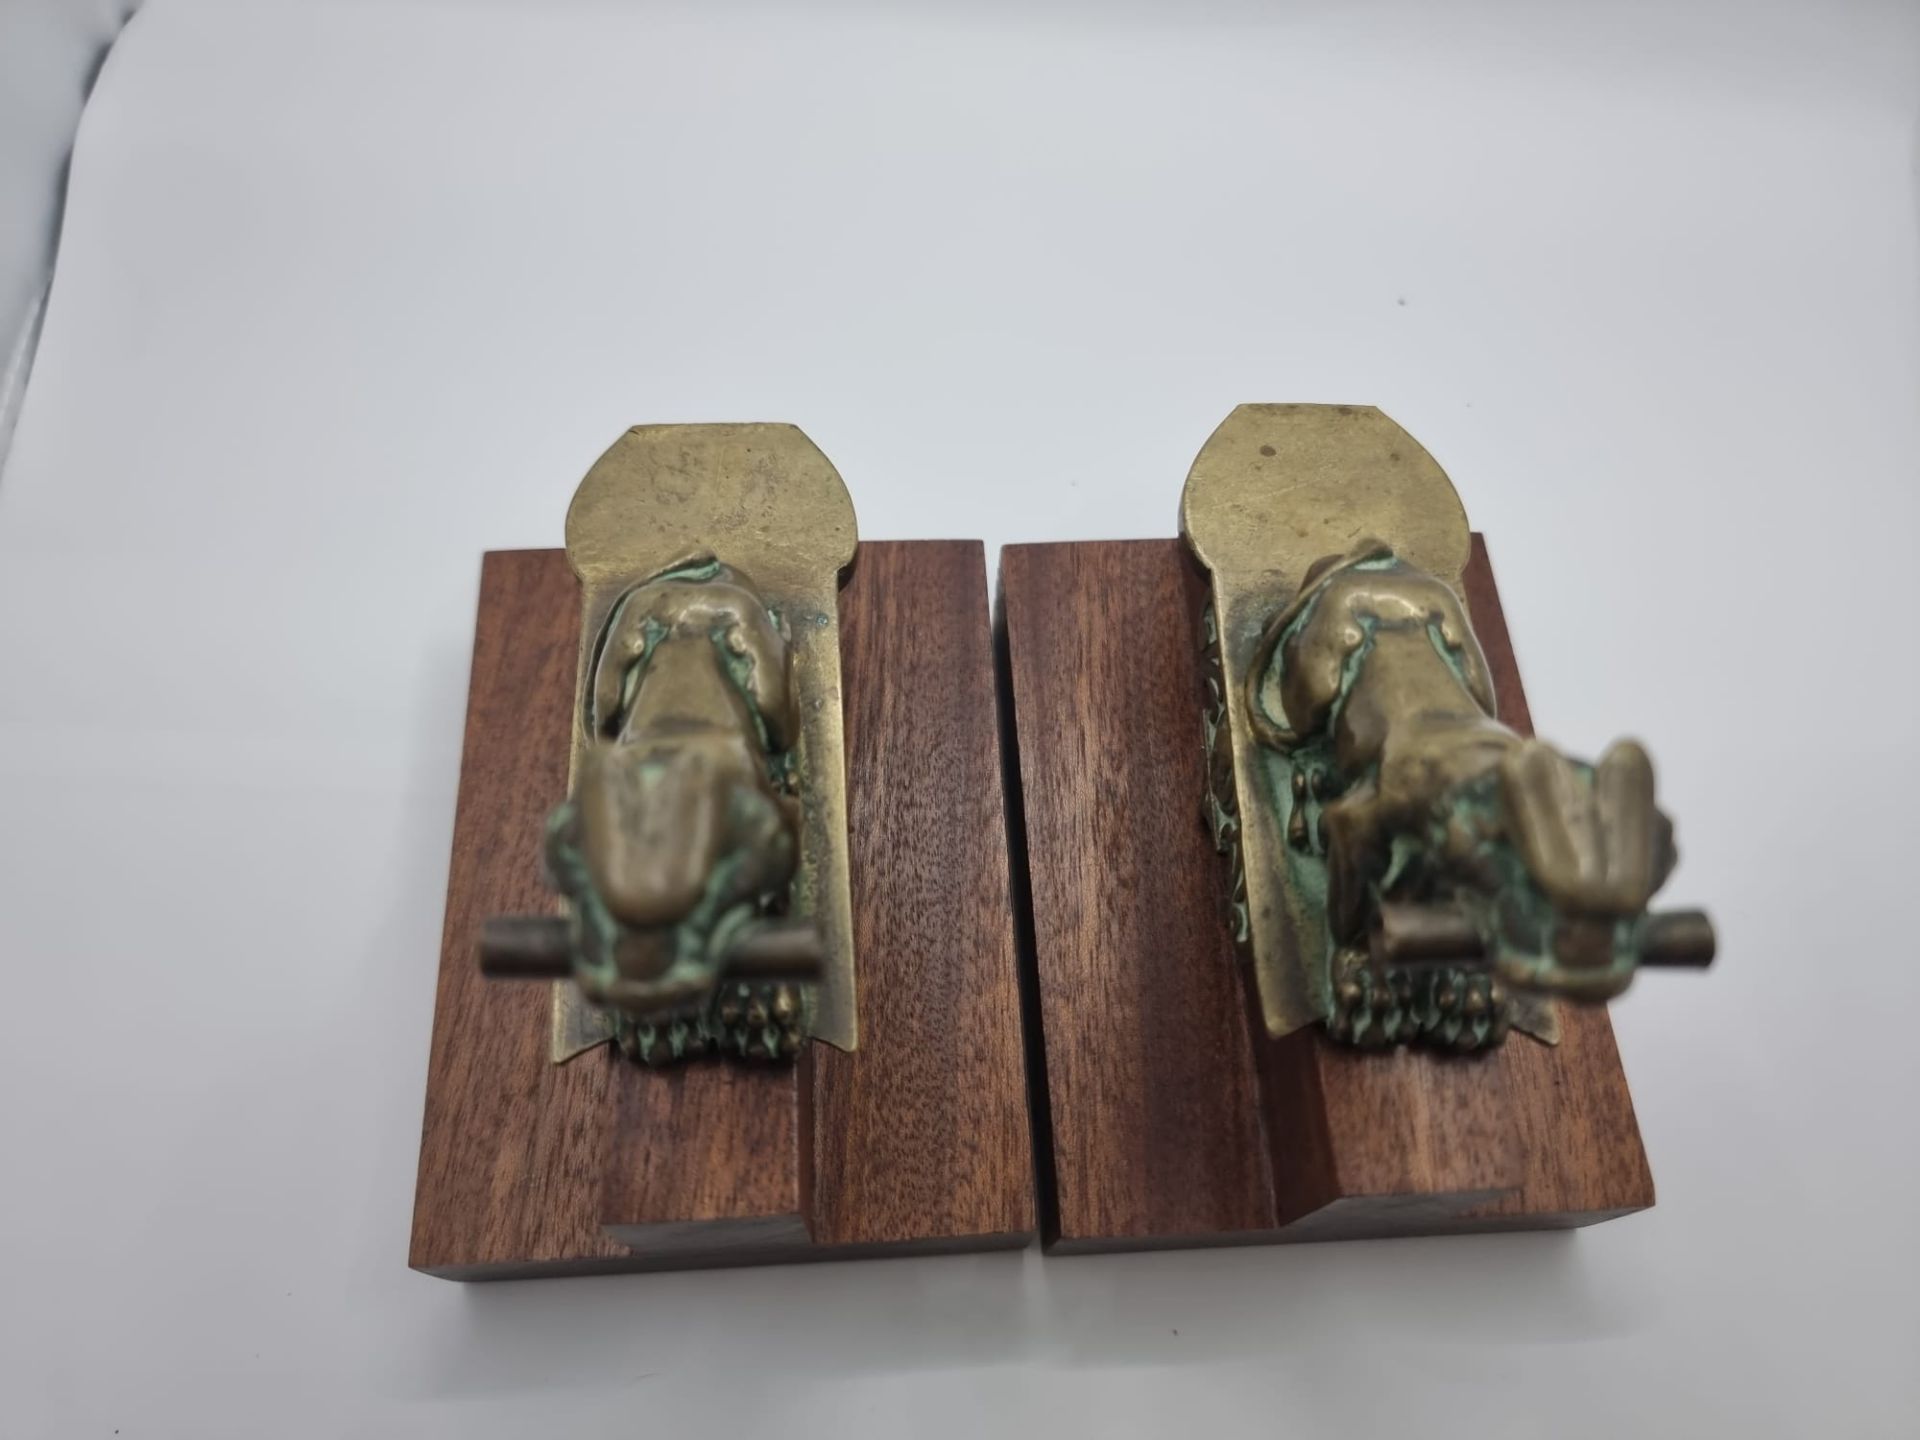 Pair Of 19th Century Decorative Bronze Lions later added to wooden plinth thus converted as Bookends - Image 7 of 10